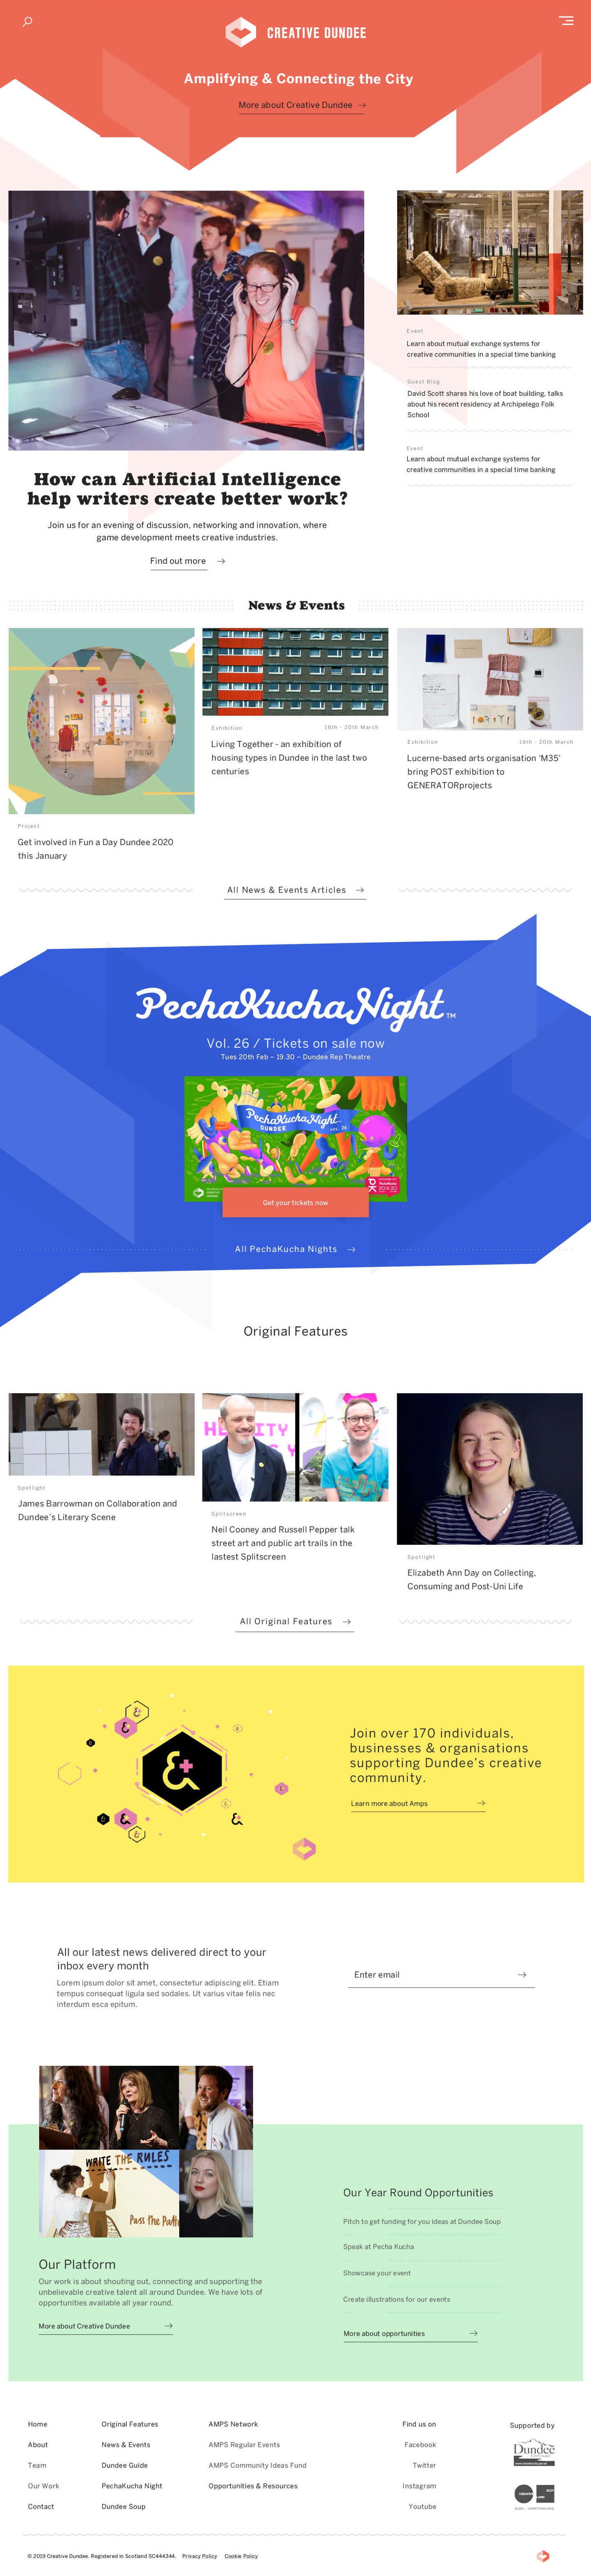 Homepage of the Creative Dundee website showing news & events articles, details of the PechaKucha nights and how to join their amps community.